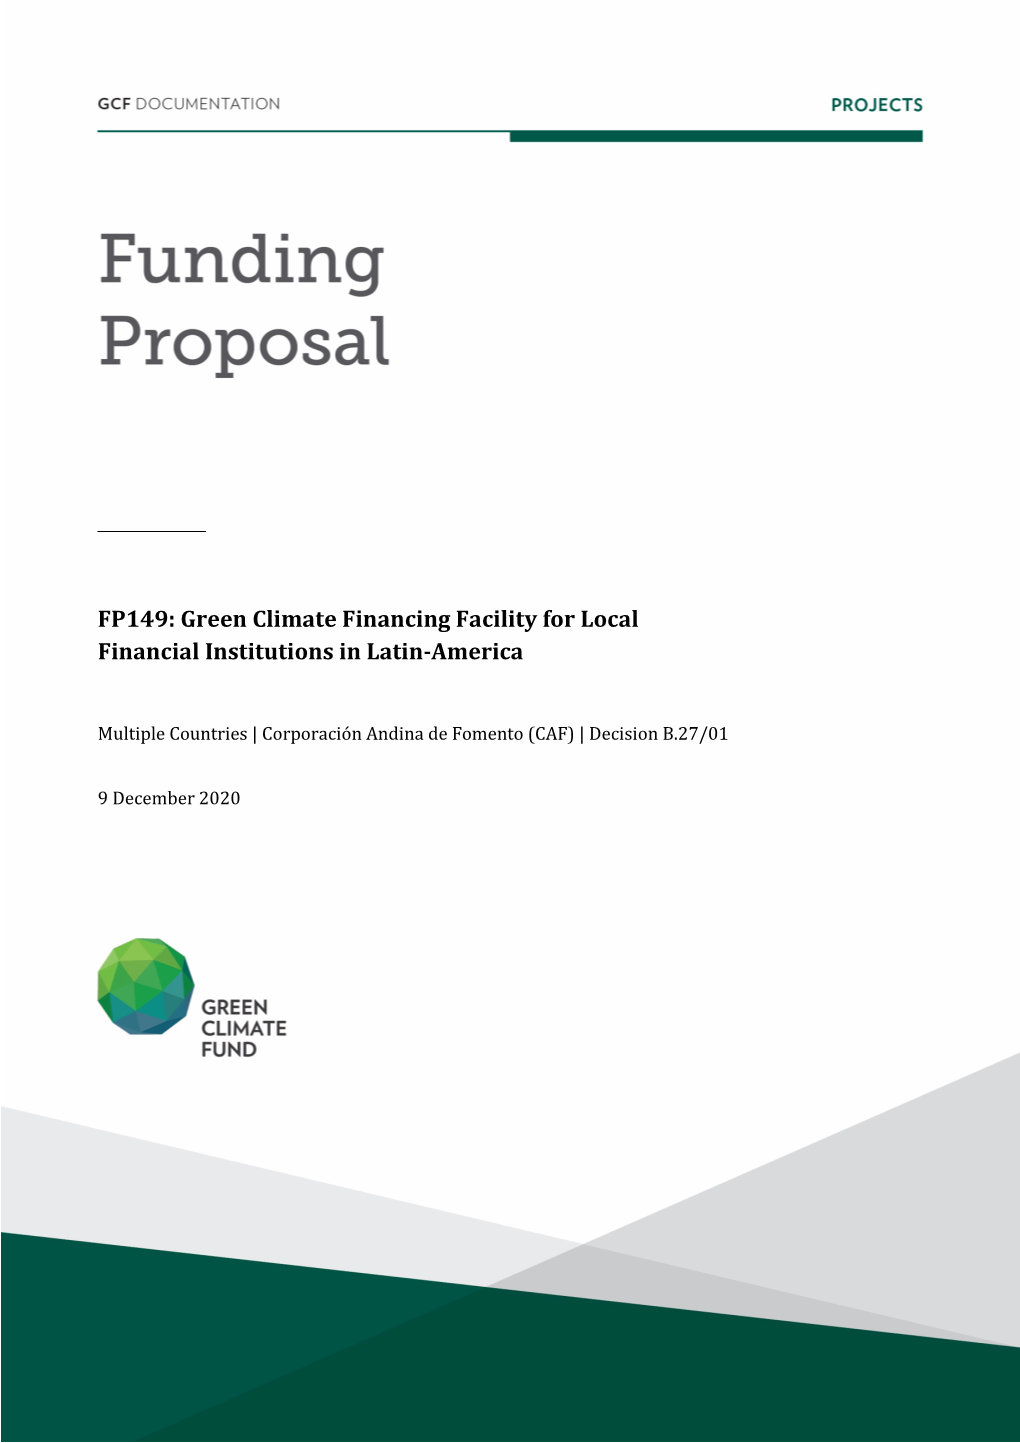 FP149: Green Climate Financing Facility for Local Financial Institutions in Latin-America